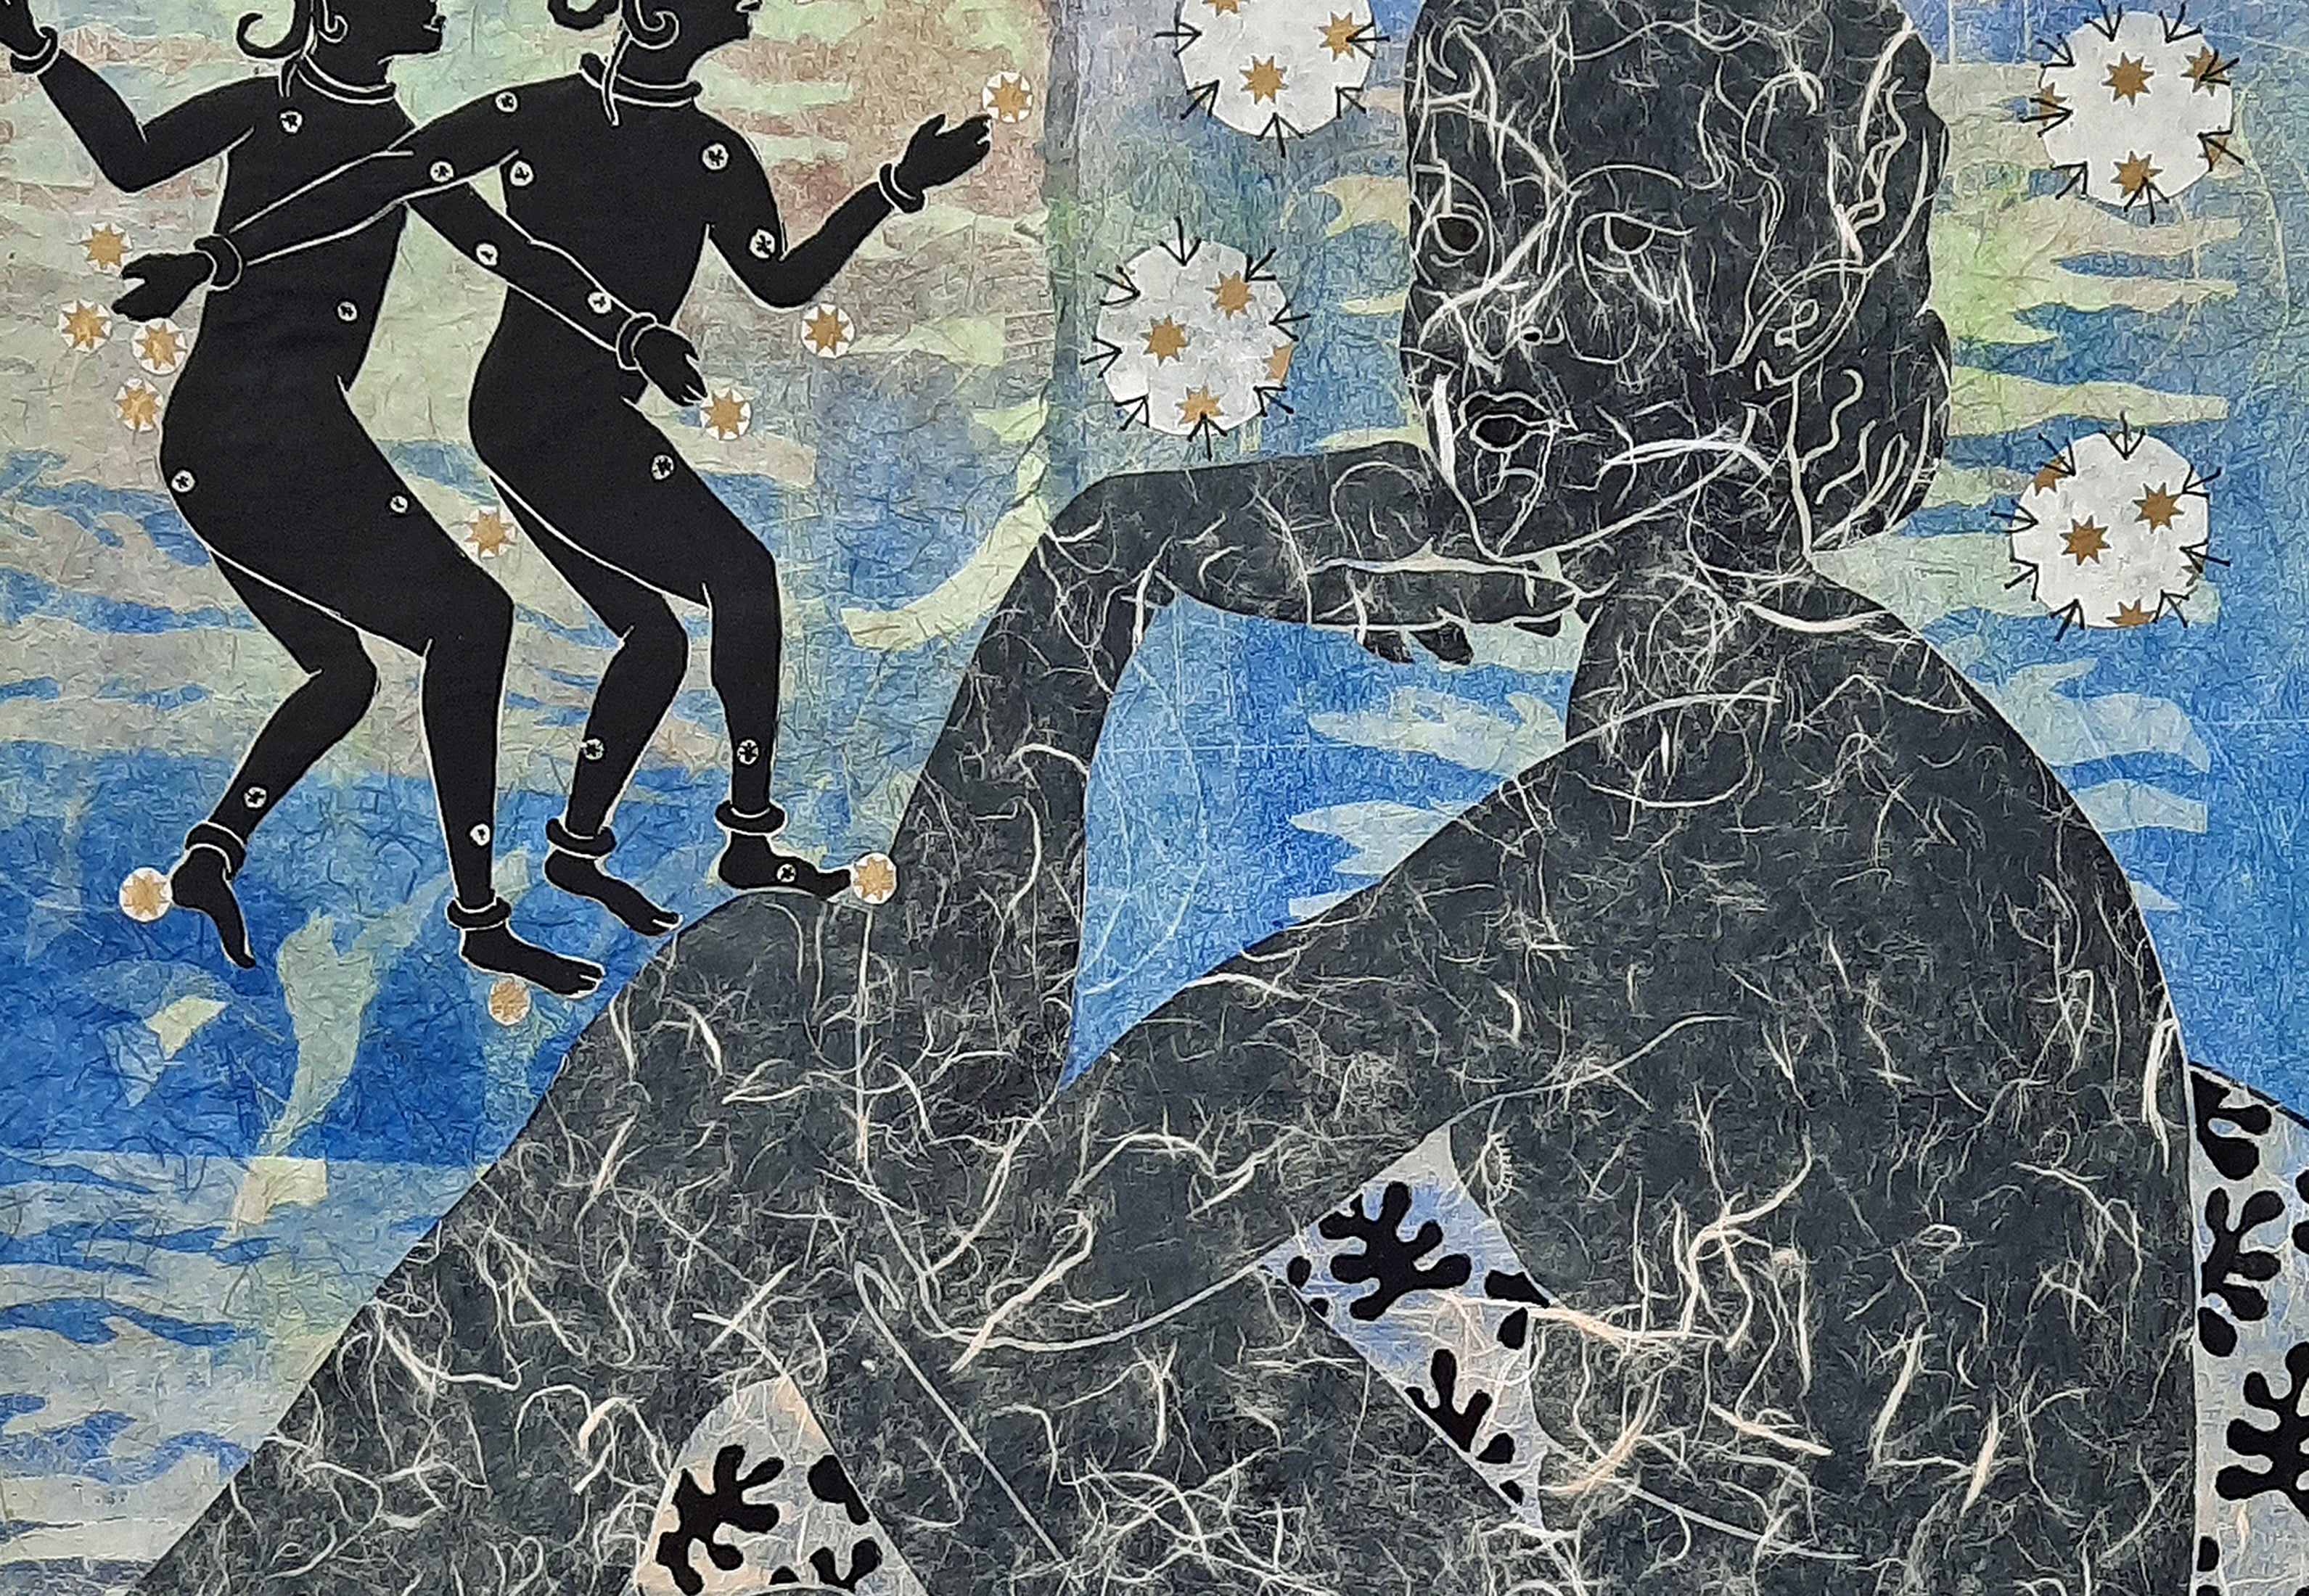 detail of The Gathering of Fixed Stars, mixed media printmaking, for sale by Ouida Touchon